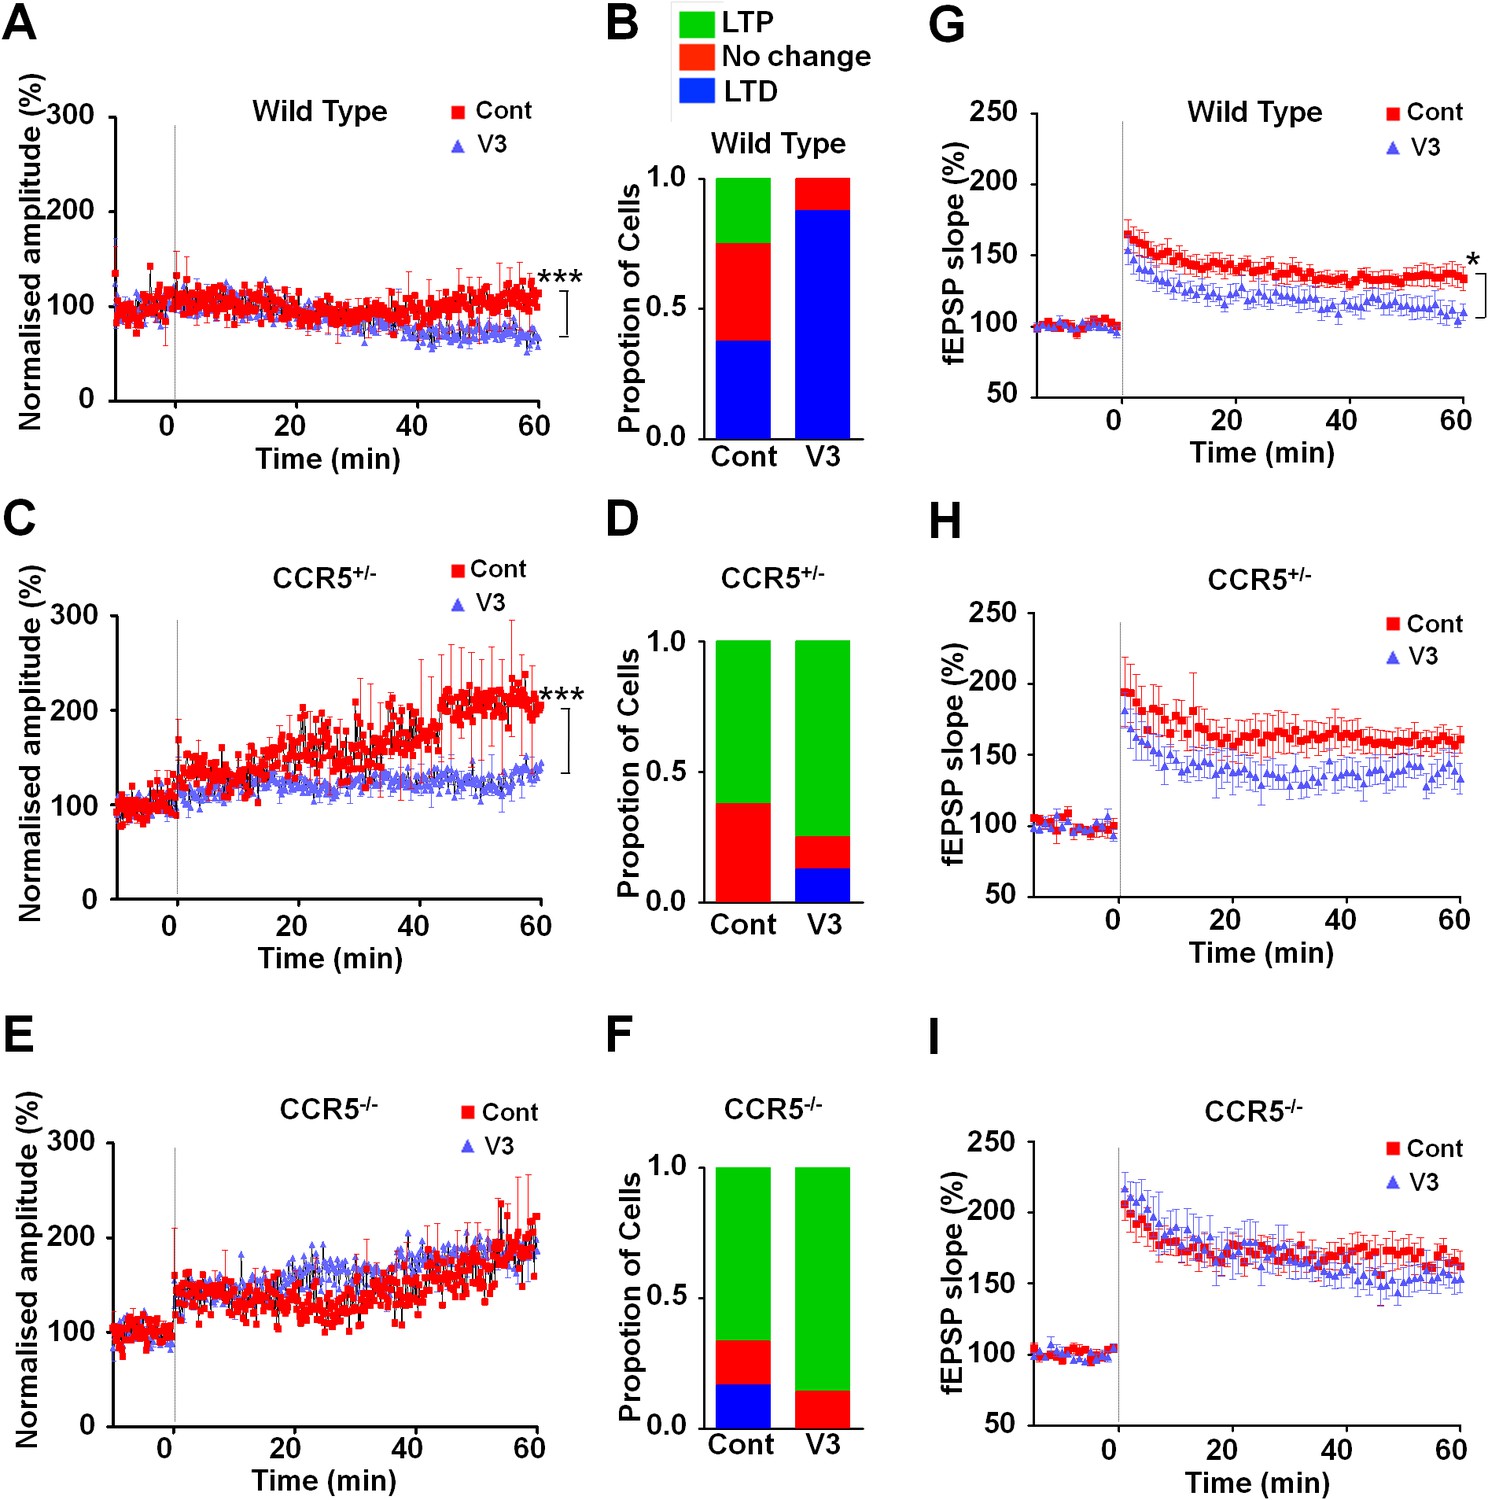 CCR5 is a suppressor for cortical plasticity and hippocampal learning and memory                    A genetic variant of fatty acid amide hydrolase (FAAH) exacerbates hormone-mediated orexigenic feeding in mice                                      Theta- and gamma-band oscillatory uncoupling in the macaque hippocampus                                      Temporal integration is a robust feature of perceptual decisions